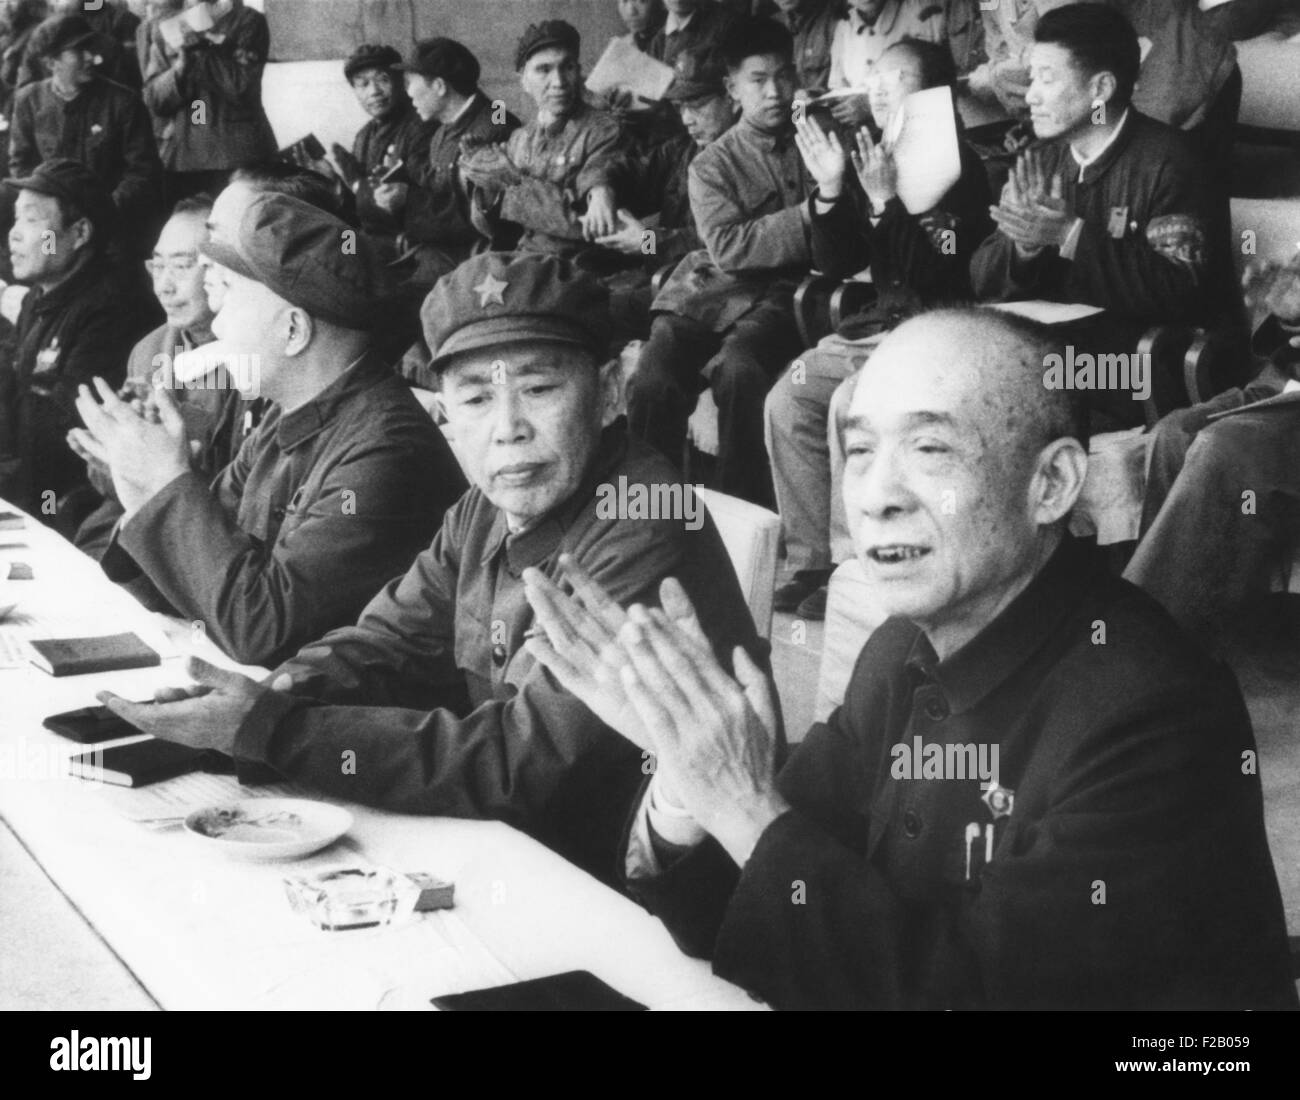 High level Chinese Government officials during the Cultural Revolution. Center: Xie Fuzhi (Hsieh Fu-Chih), Vice Premier and Minister of Public Security. Right: Li Fuchun (Li Fu-Chun), Director State Planning Commission. Xie was an Ally of the 'Gang of Four' and supporter of the Red Guards. Li attacked the Cultural Revolution in meetings in Feb. 1967. Photo dated before April 1967. (CSU 2015 9 701) Stock Photo